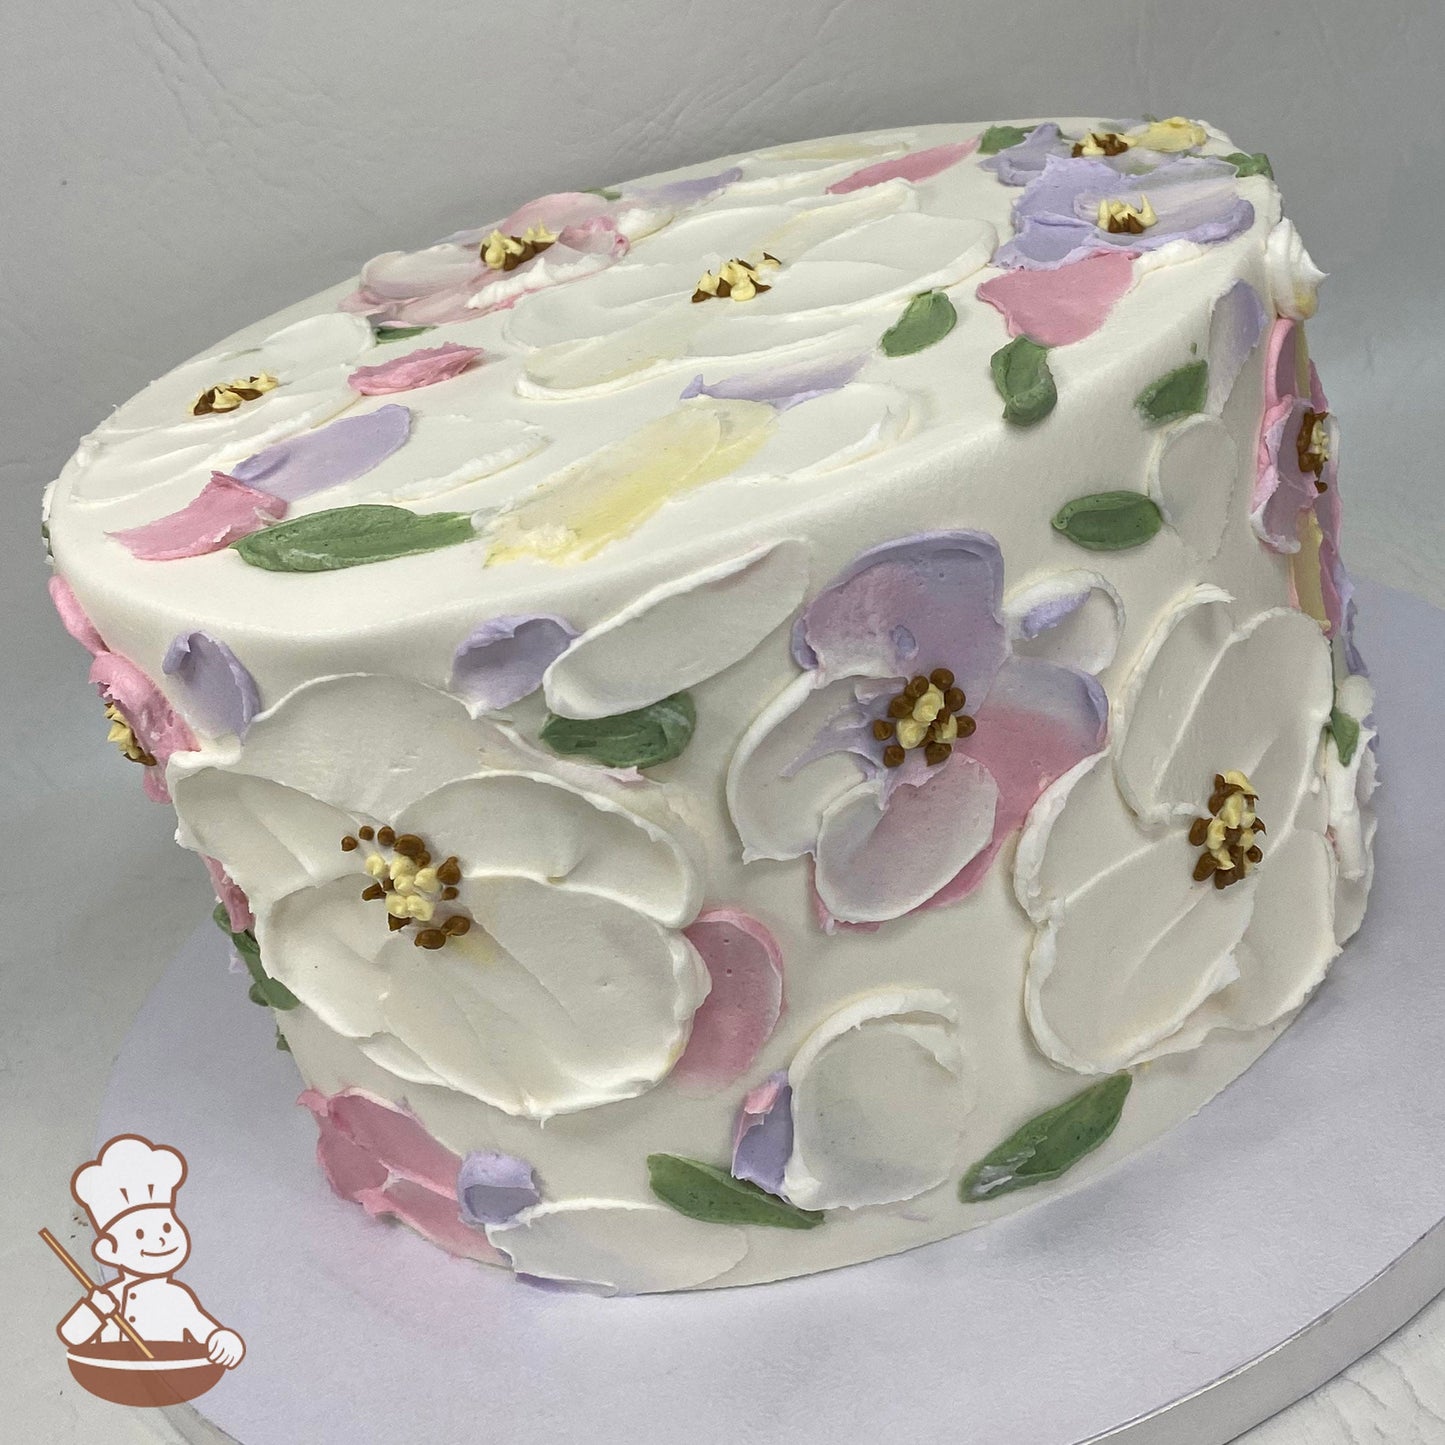 Single tier cake with smooth white icing, decorated with lavender, mauve and white palette knife flowers.